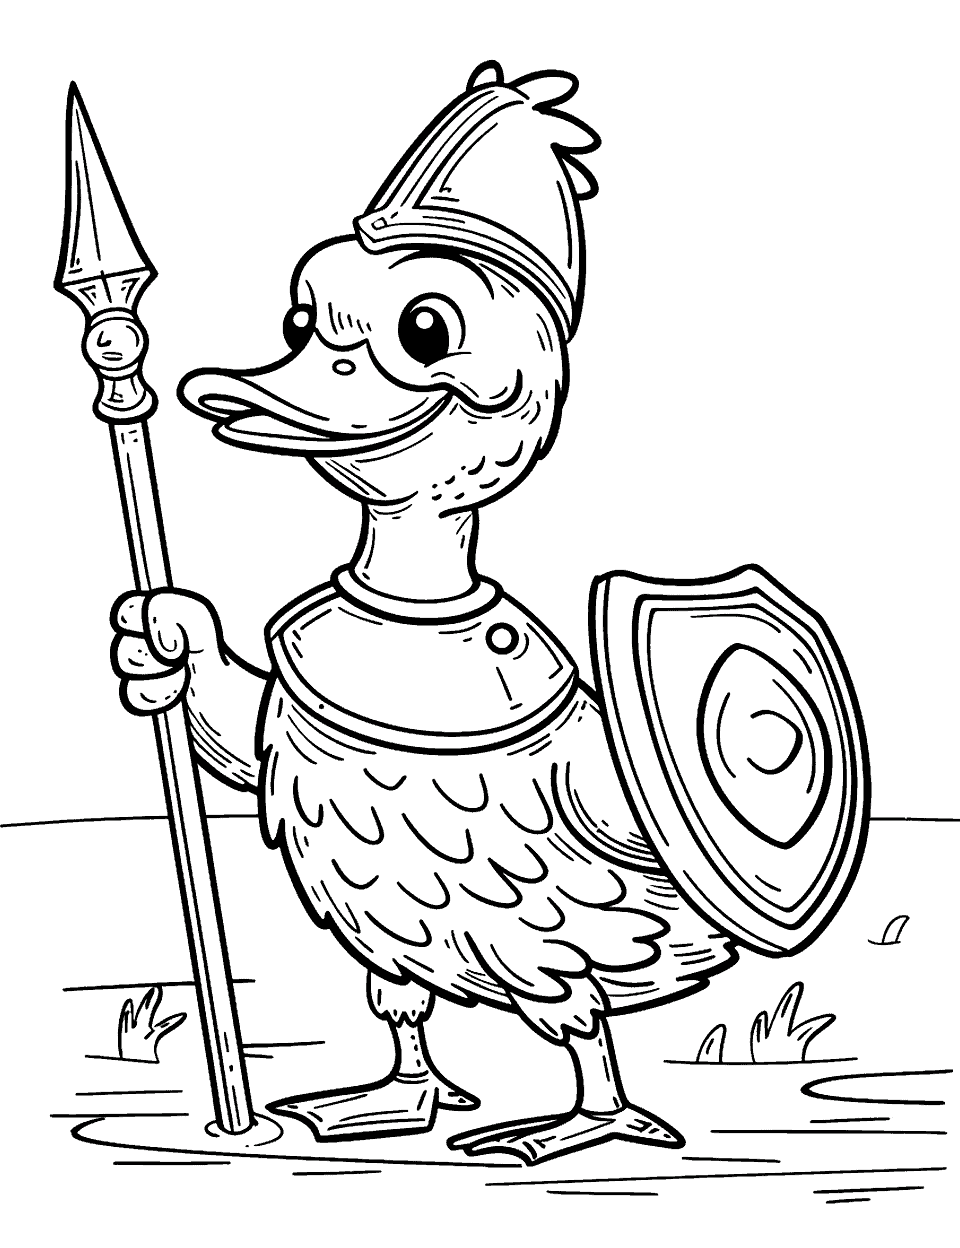 Duck as a Knight Coloring Page - A valiant duck armored as a knight, holding a shield and a lance.